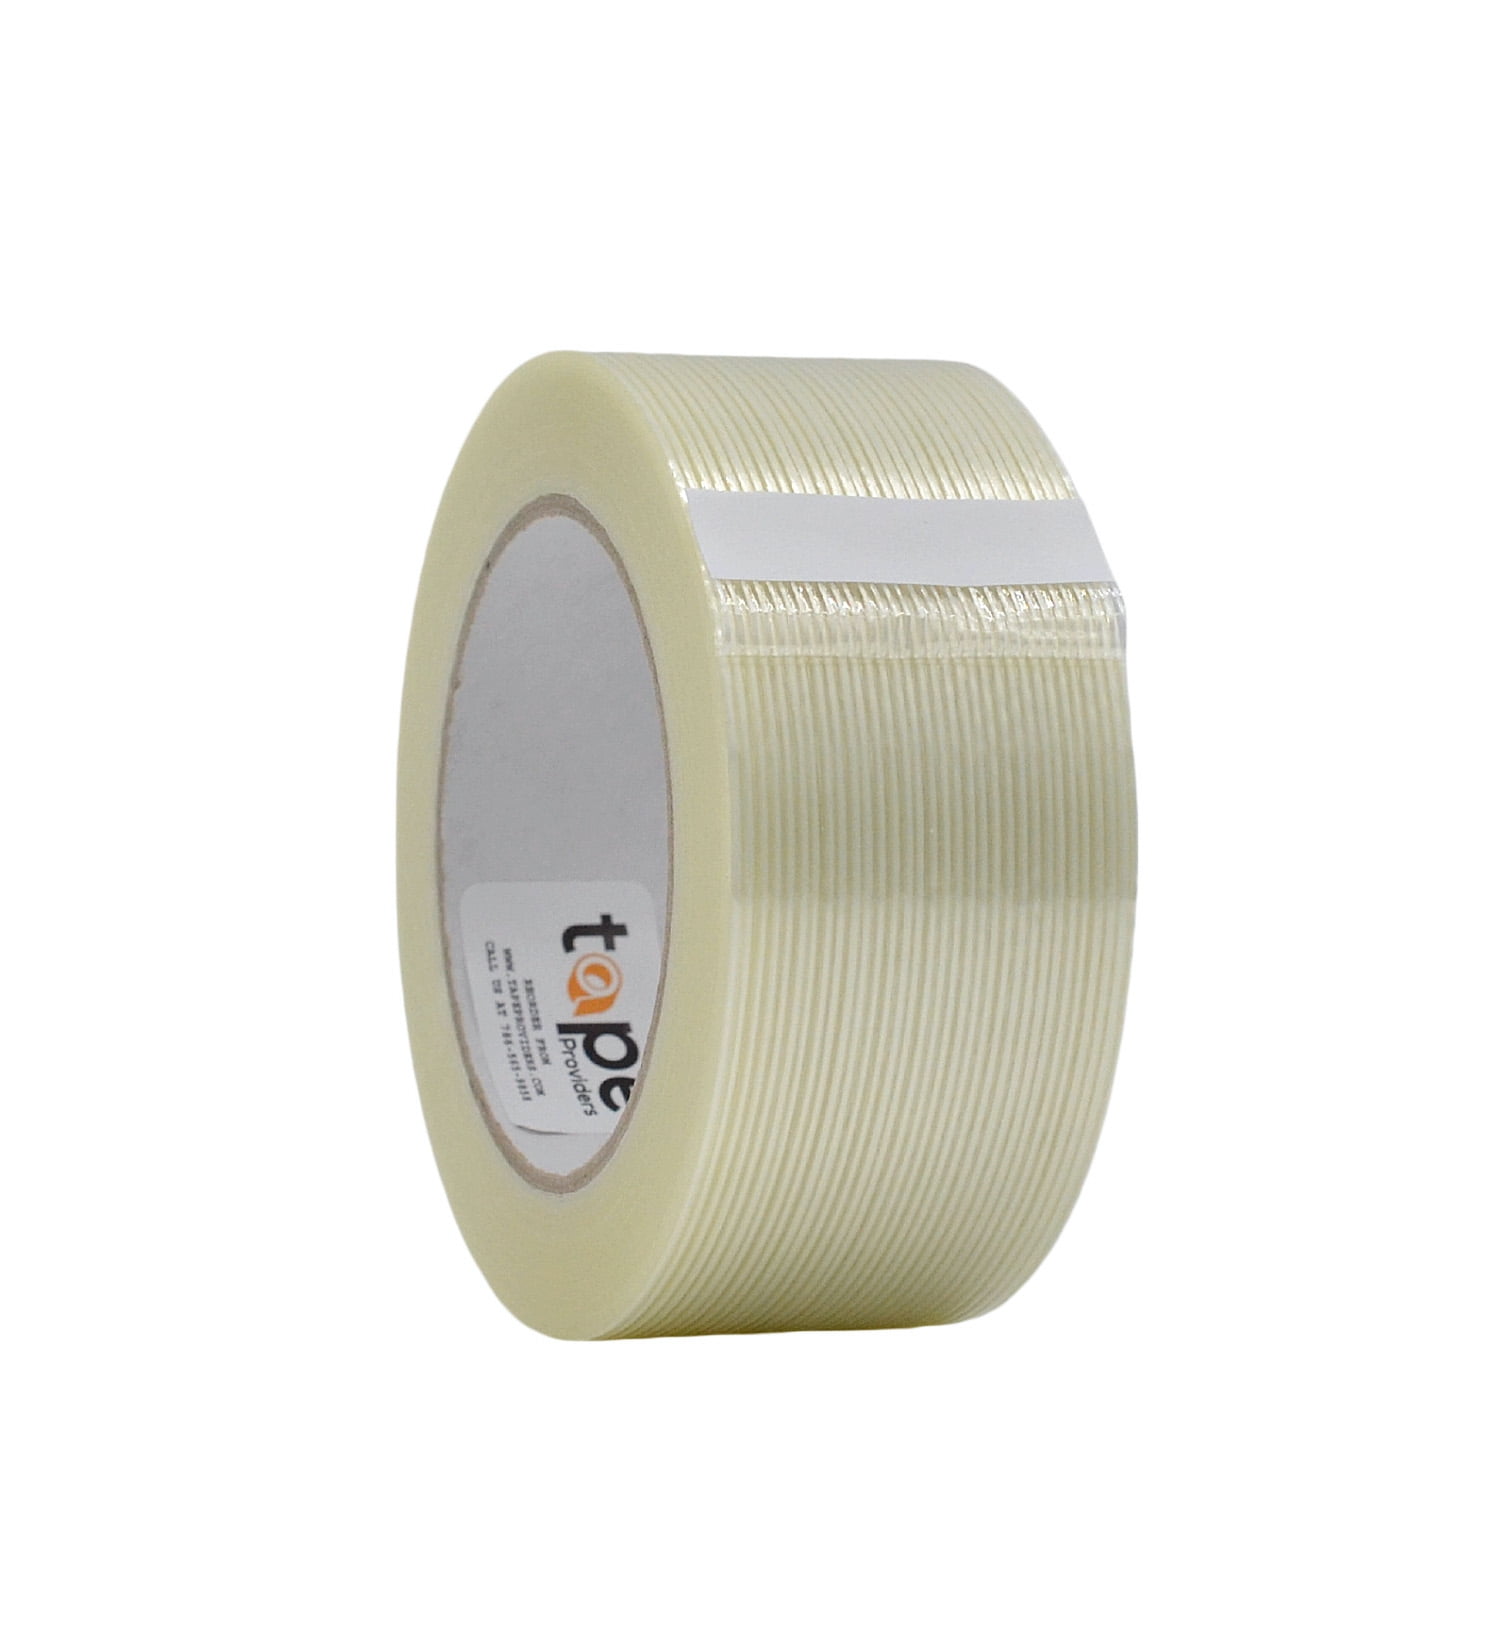 Filaments Run Lengthwise 4 Mil Also Available in Multiple Sizes Pack of 48 WOD UFST39 Commodity Grade Fiberglass Reinforced Filament Strapping Tape : 3/4 in Wide x 60 yds. 